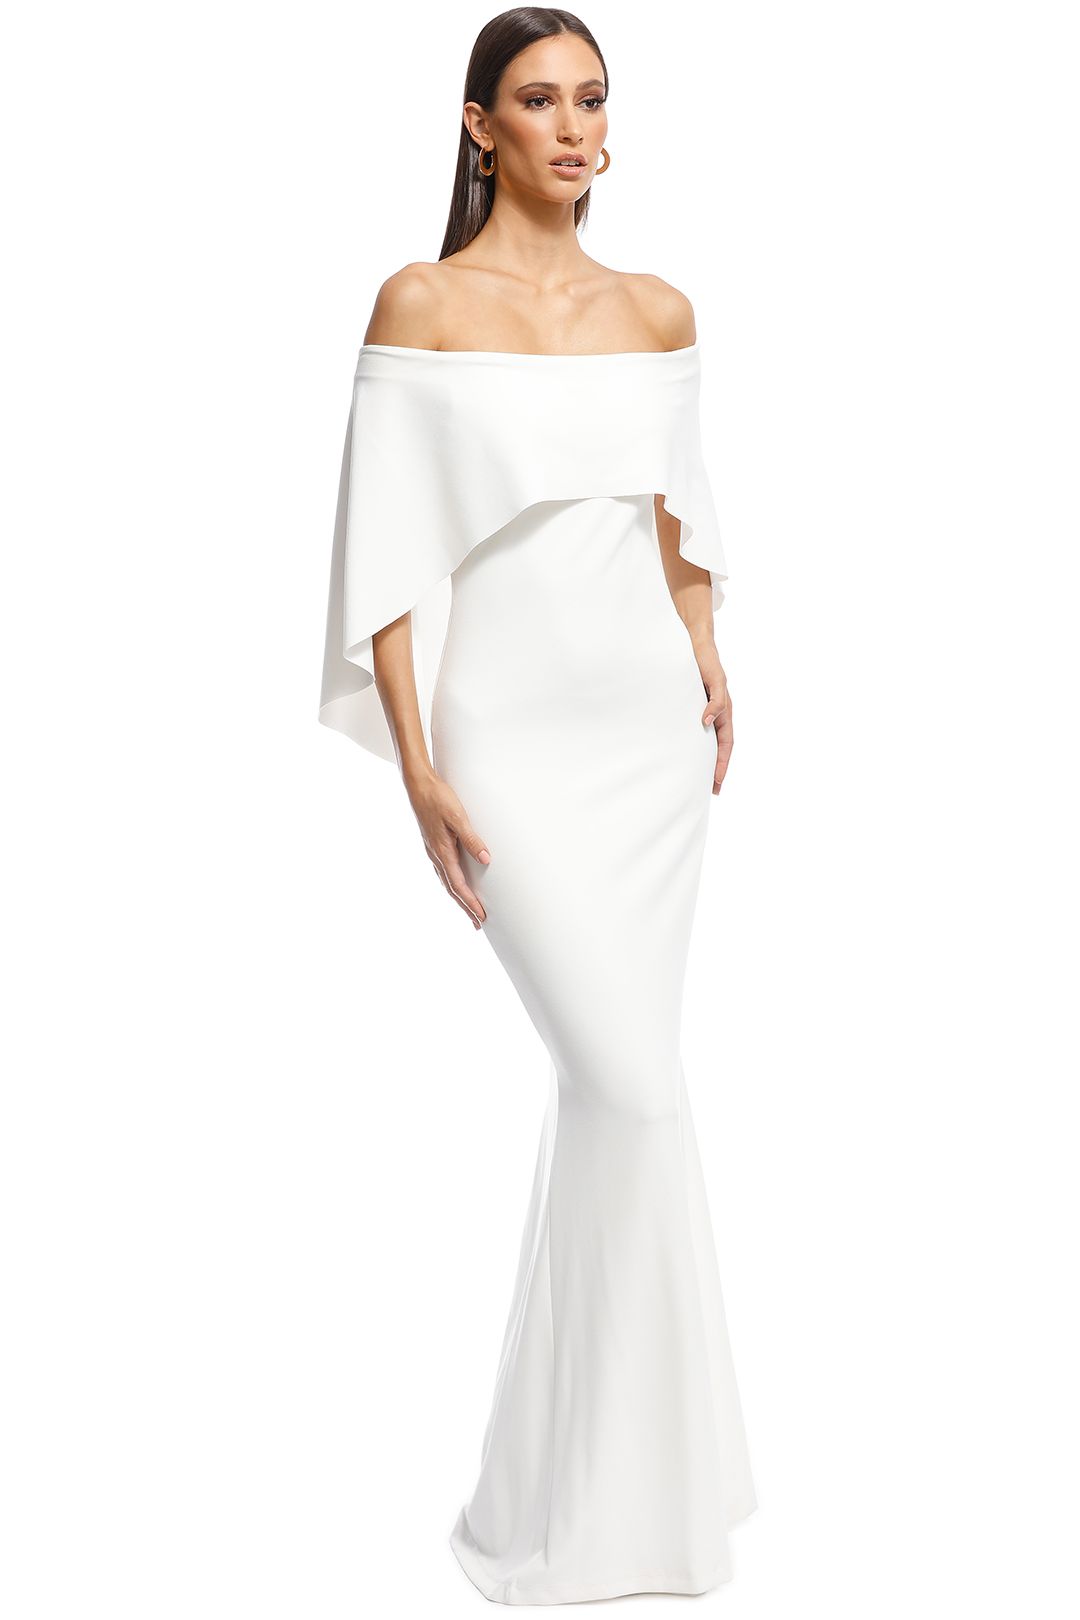 Pasduchas - Composure Gown - Ivory - Side